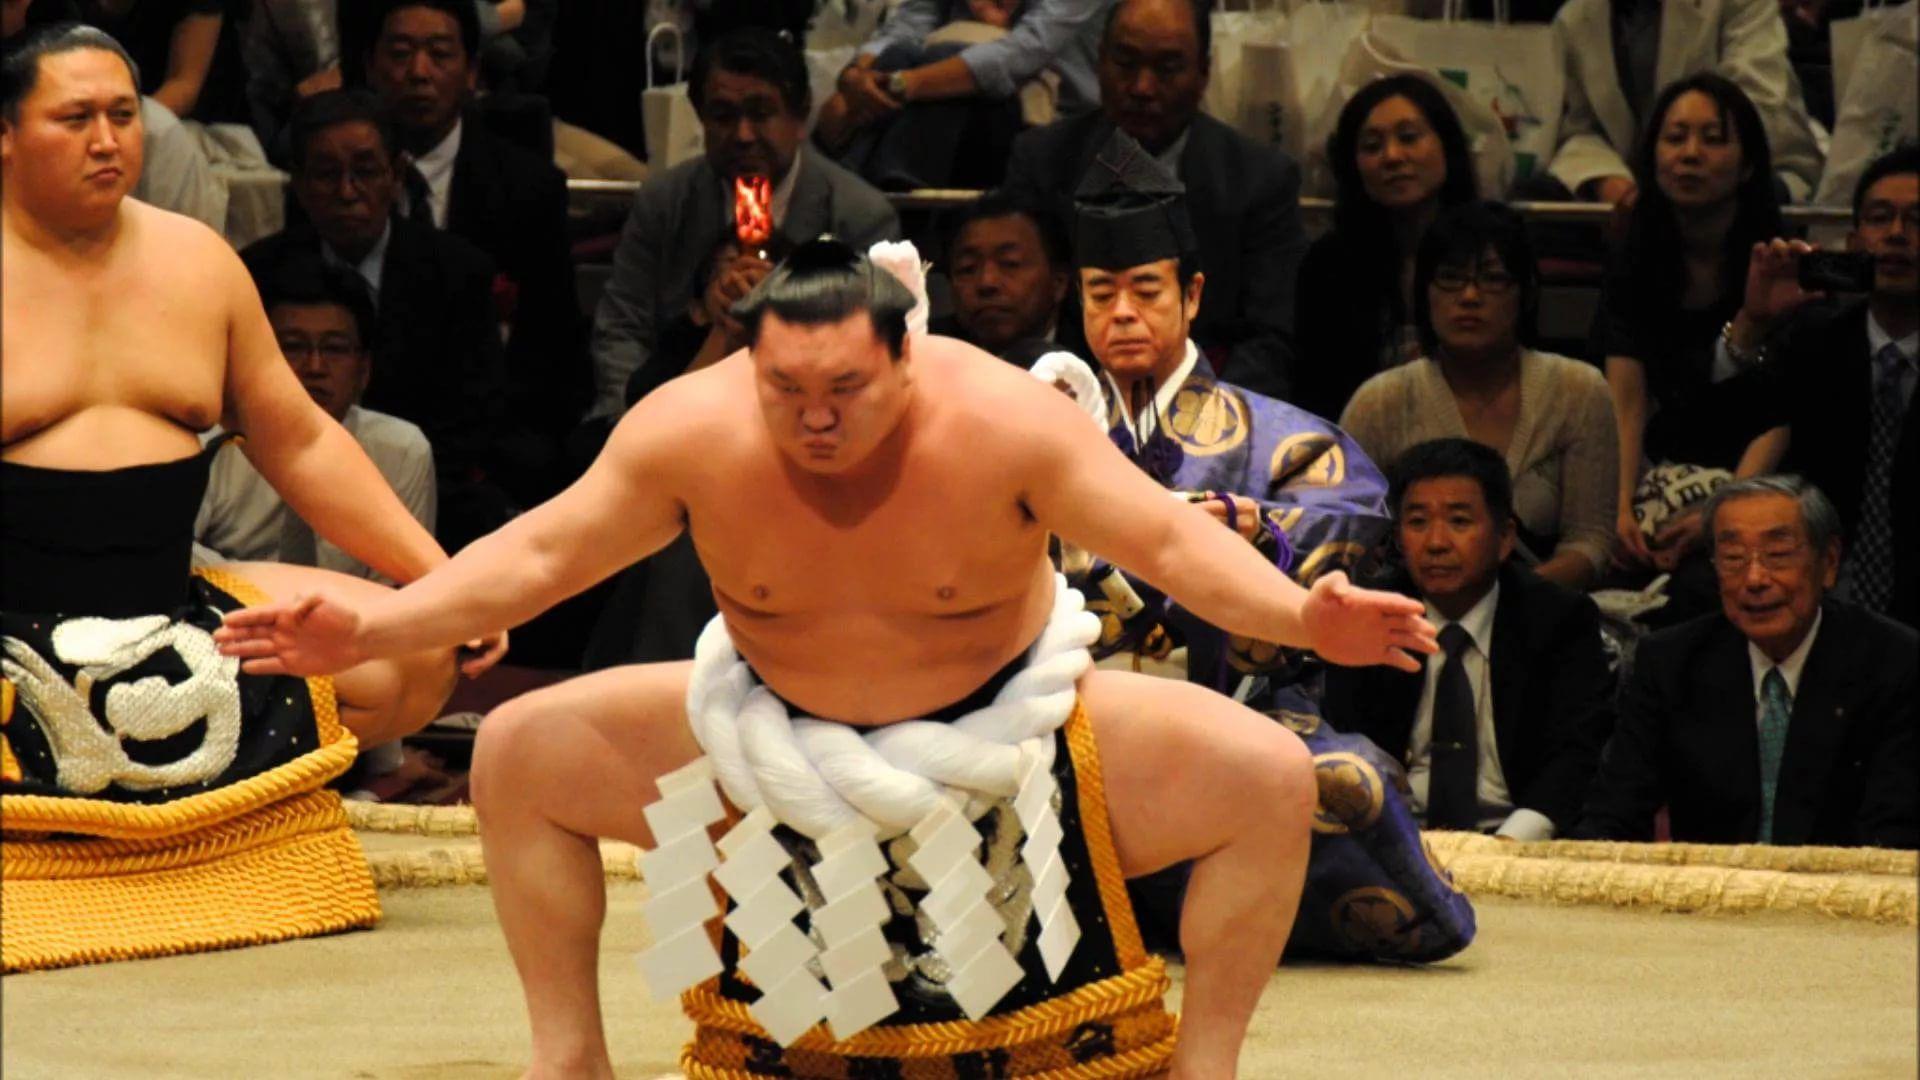 Two Men Performing Sumo Background, Pictures Of Sumo Background Image And  Wallpaper for Free Download